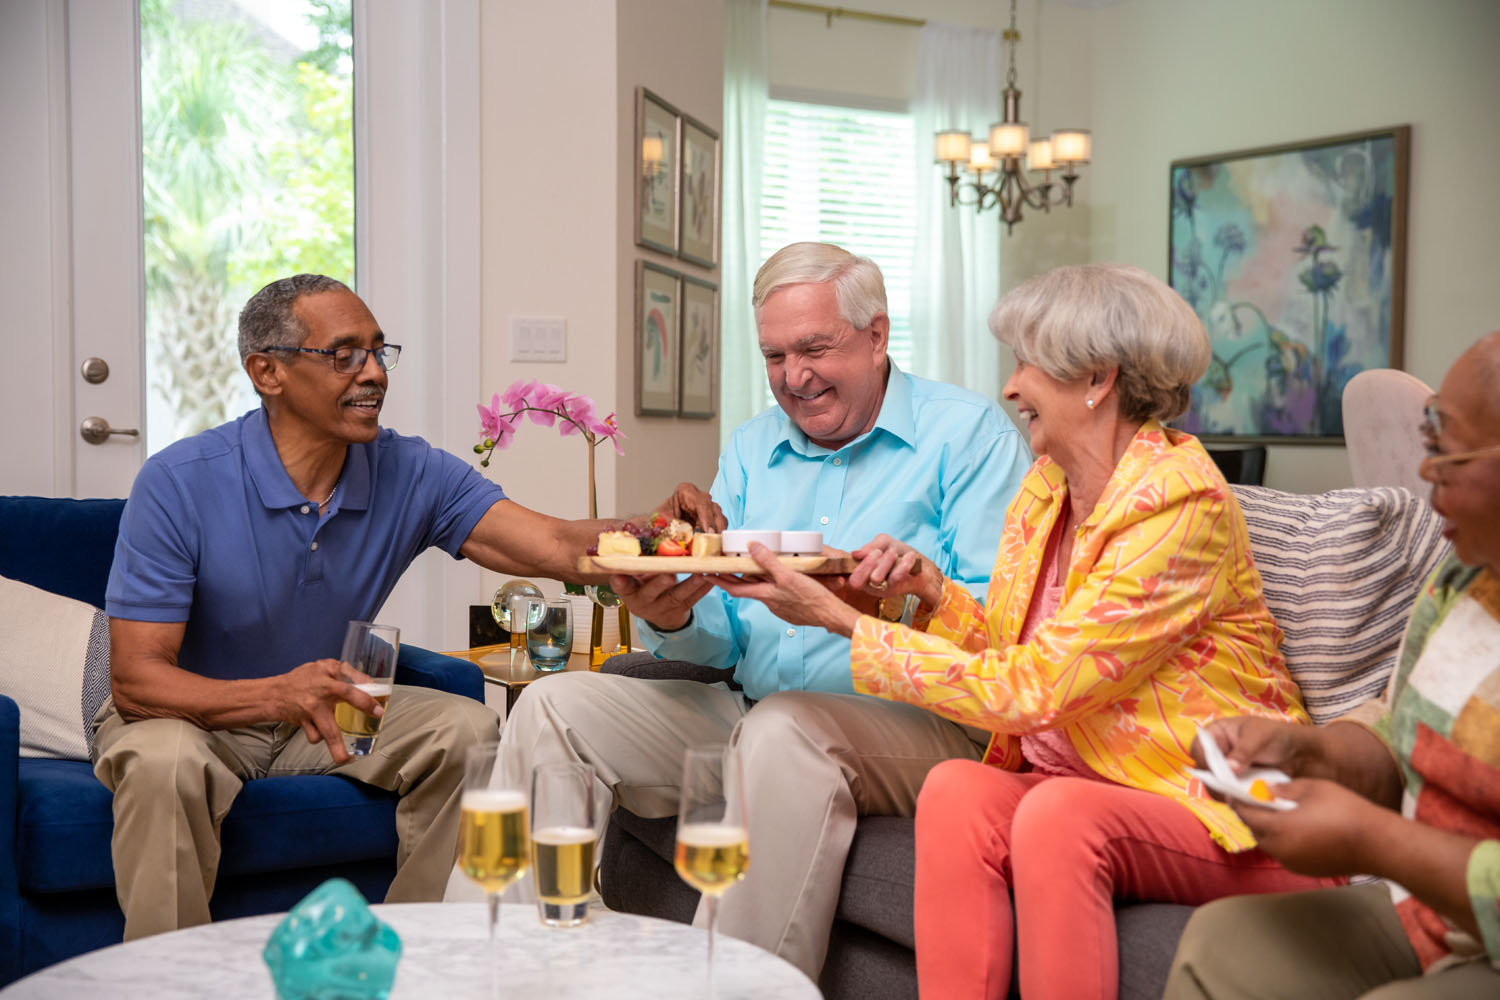 group of senior citizens sharing a plate of food smiling 